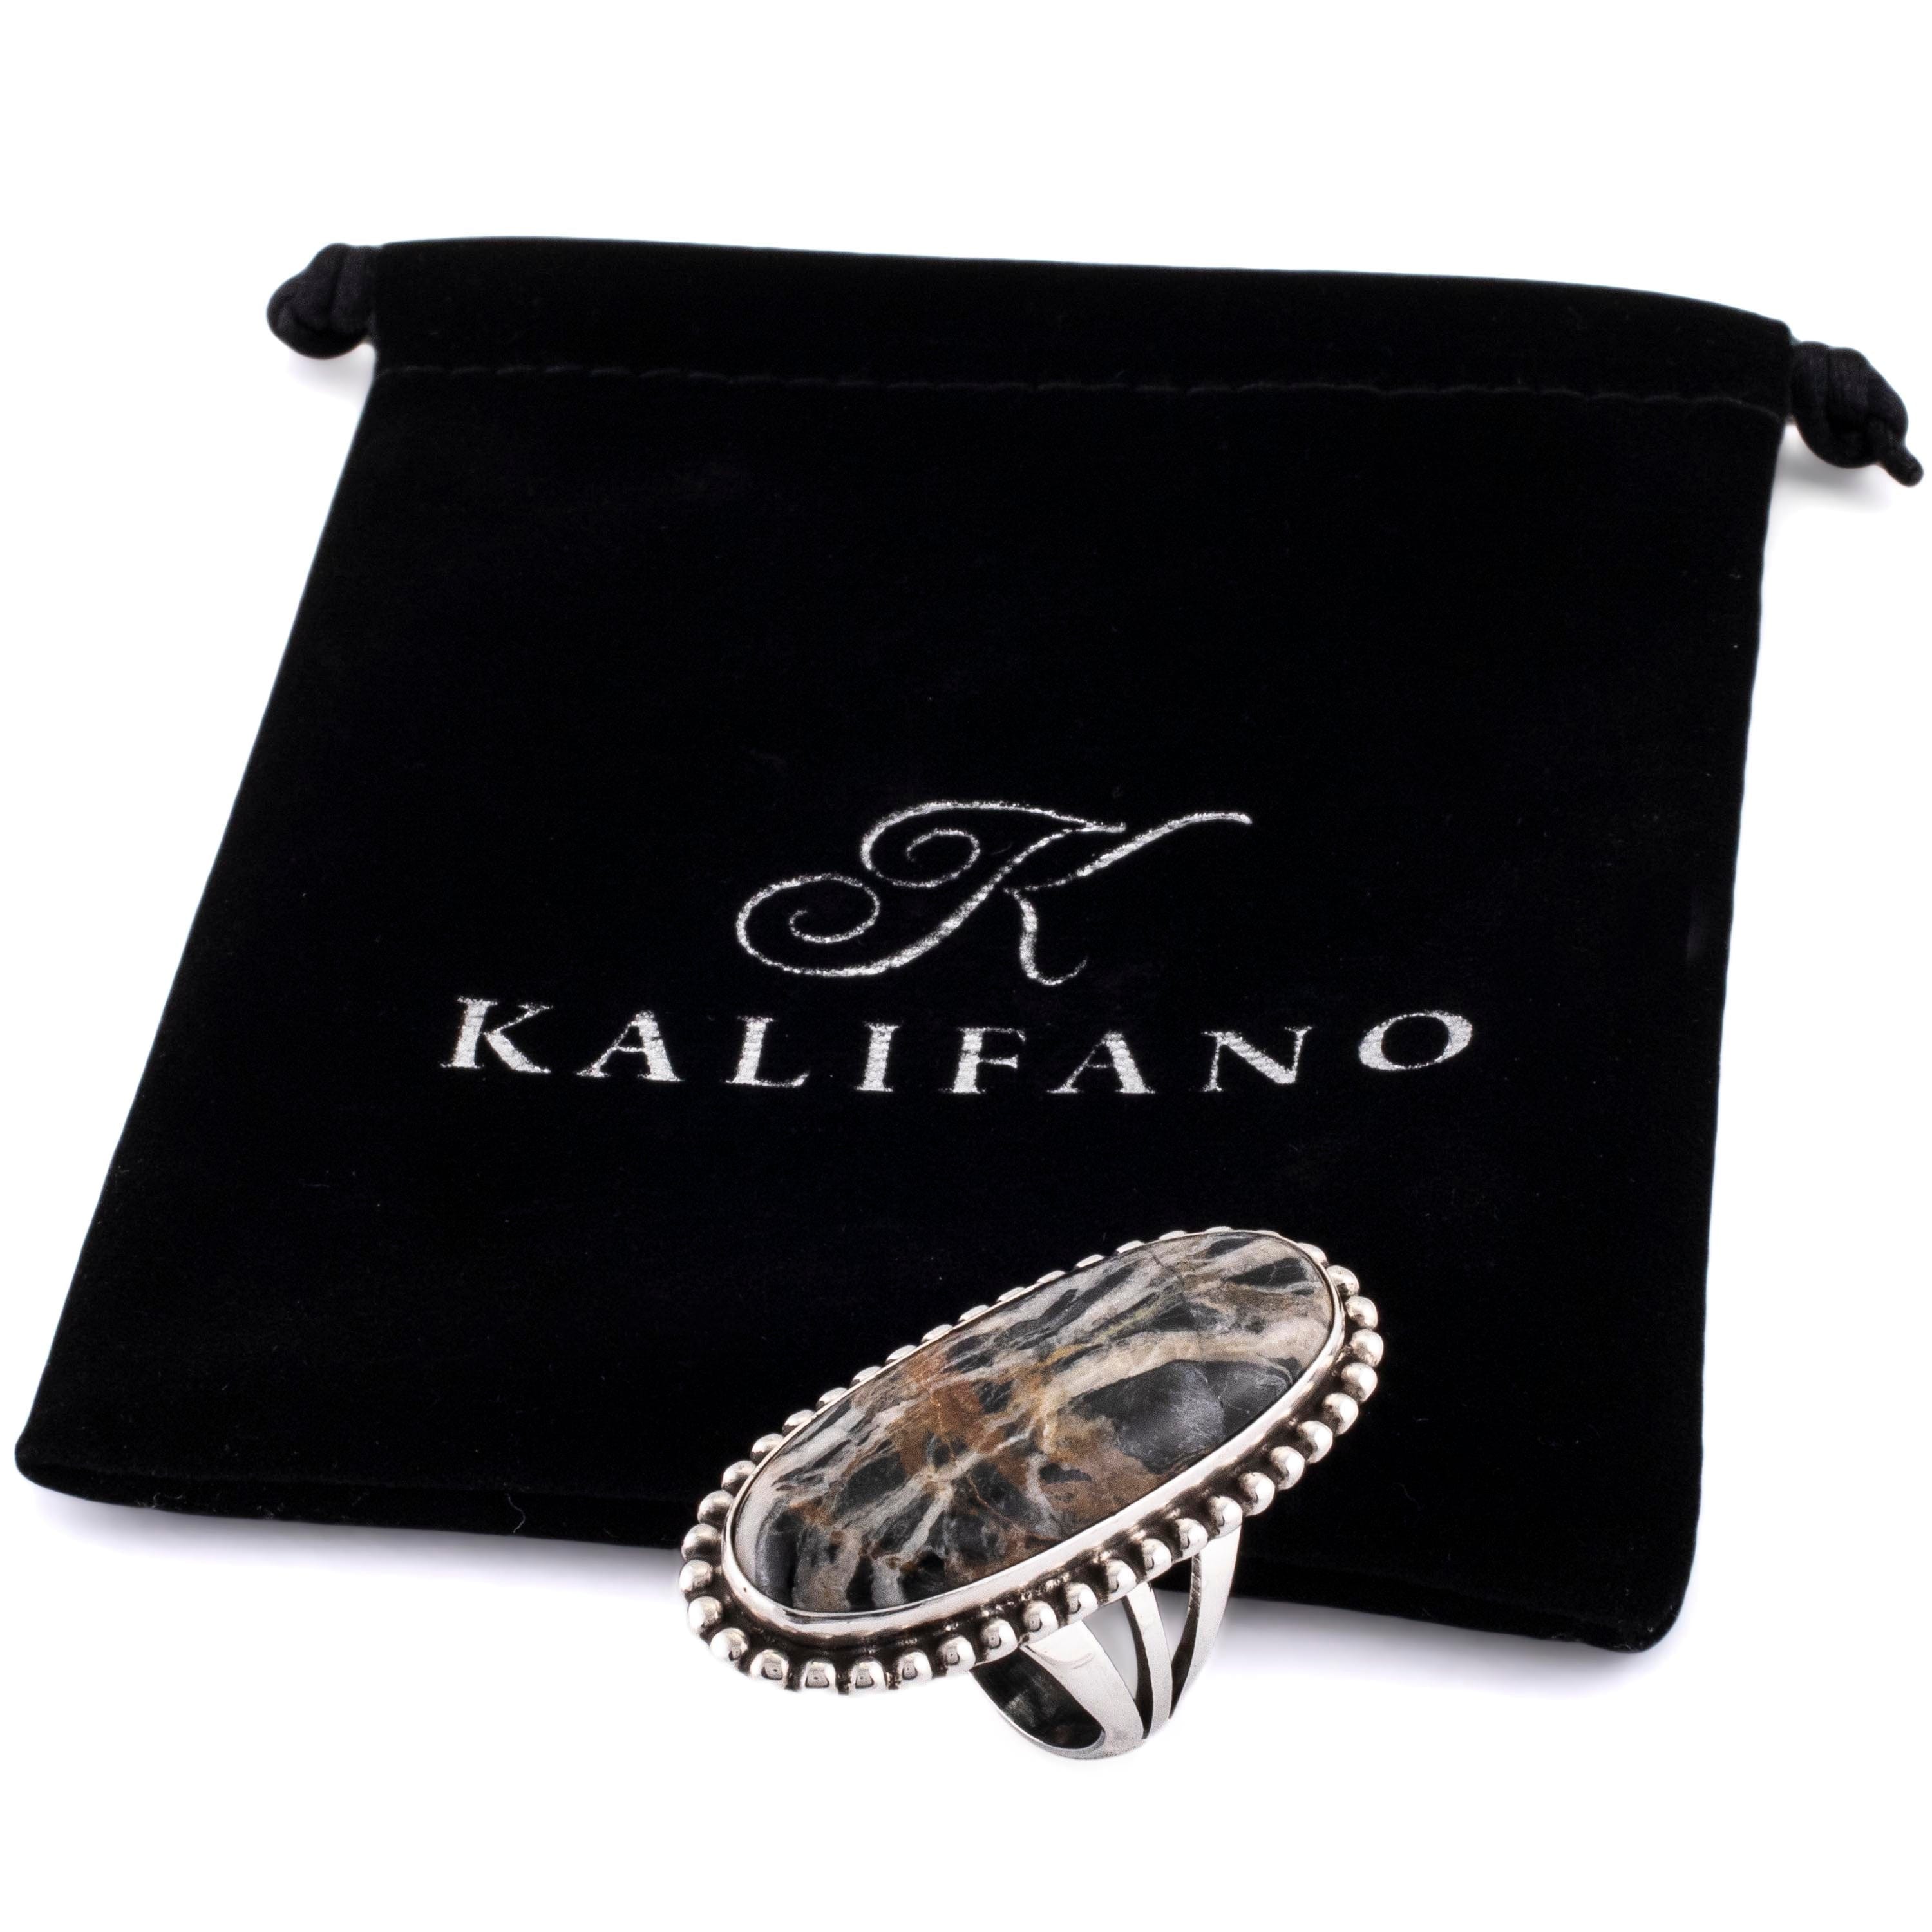 Kalifano Native American Jewelry 8 Eddie Secatero Navajo White Buffalo Turquoise USA Native American Made 925 Sterling Silver Ring NAR900.024.8